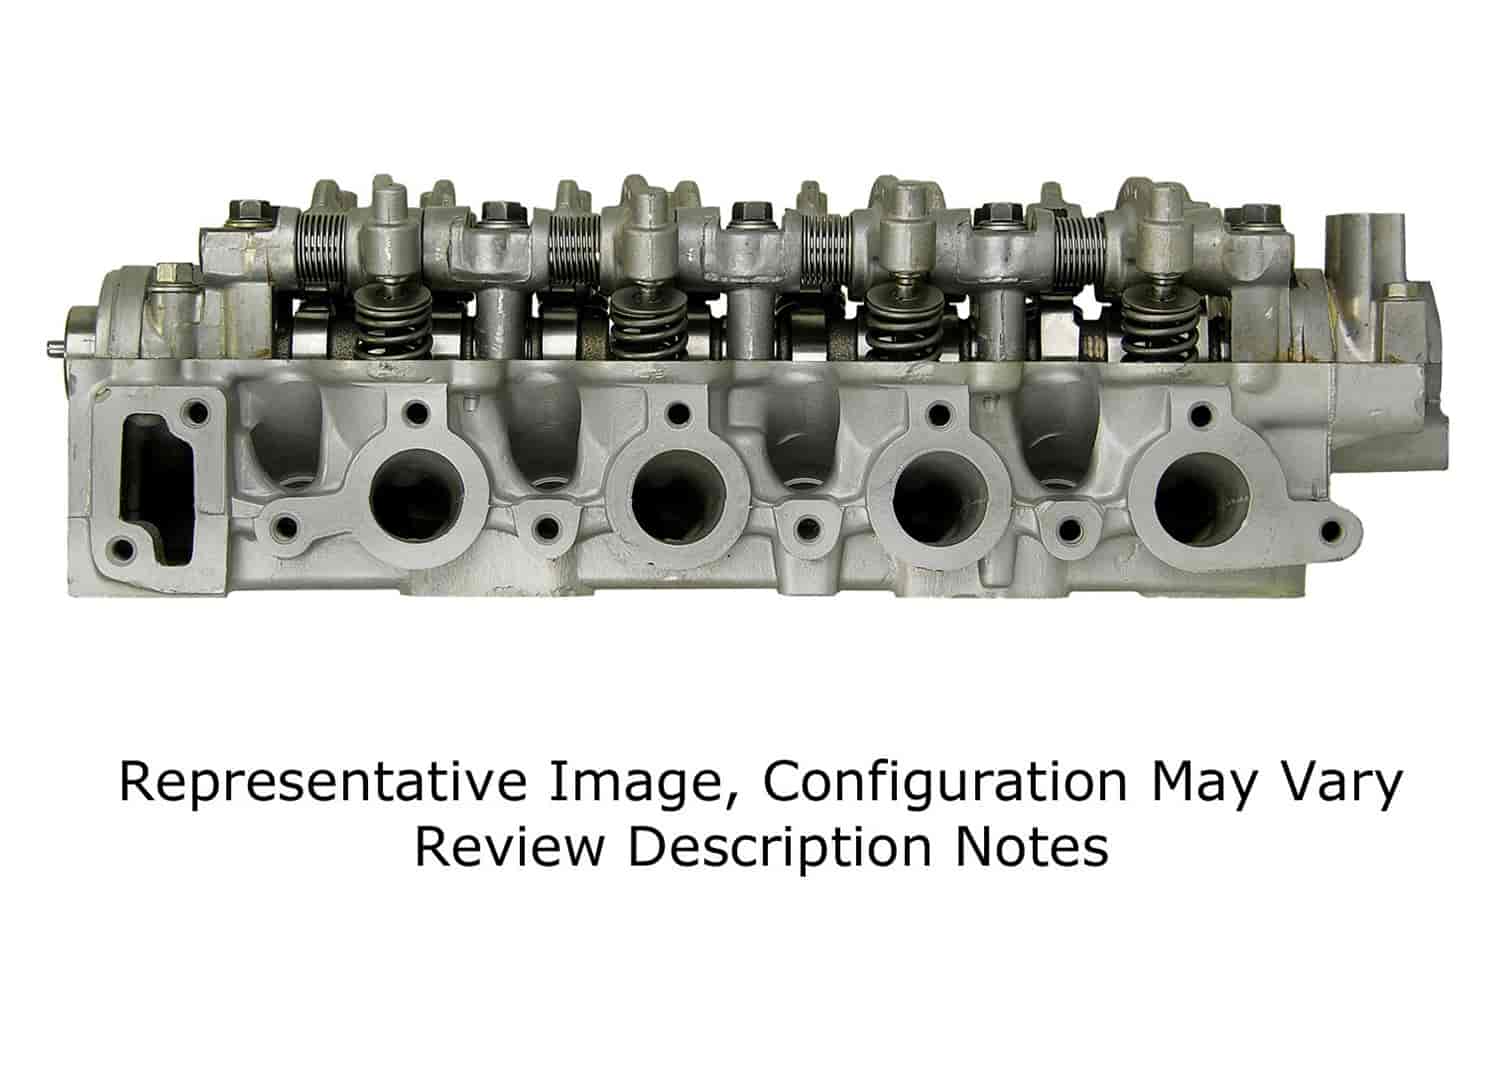 Remanufactured Cylinder Head for 1993-1994 Hyundai Scoupe with